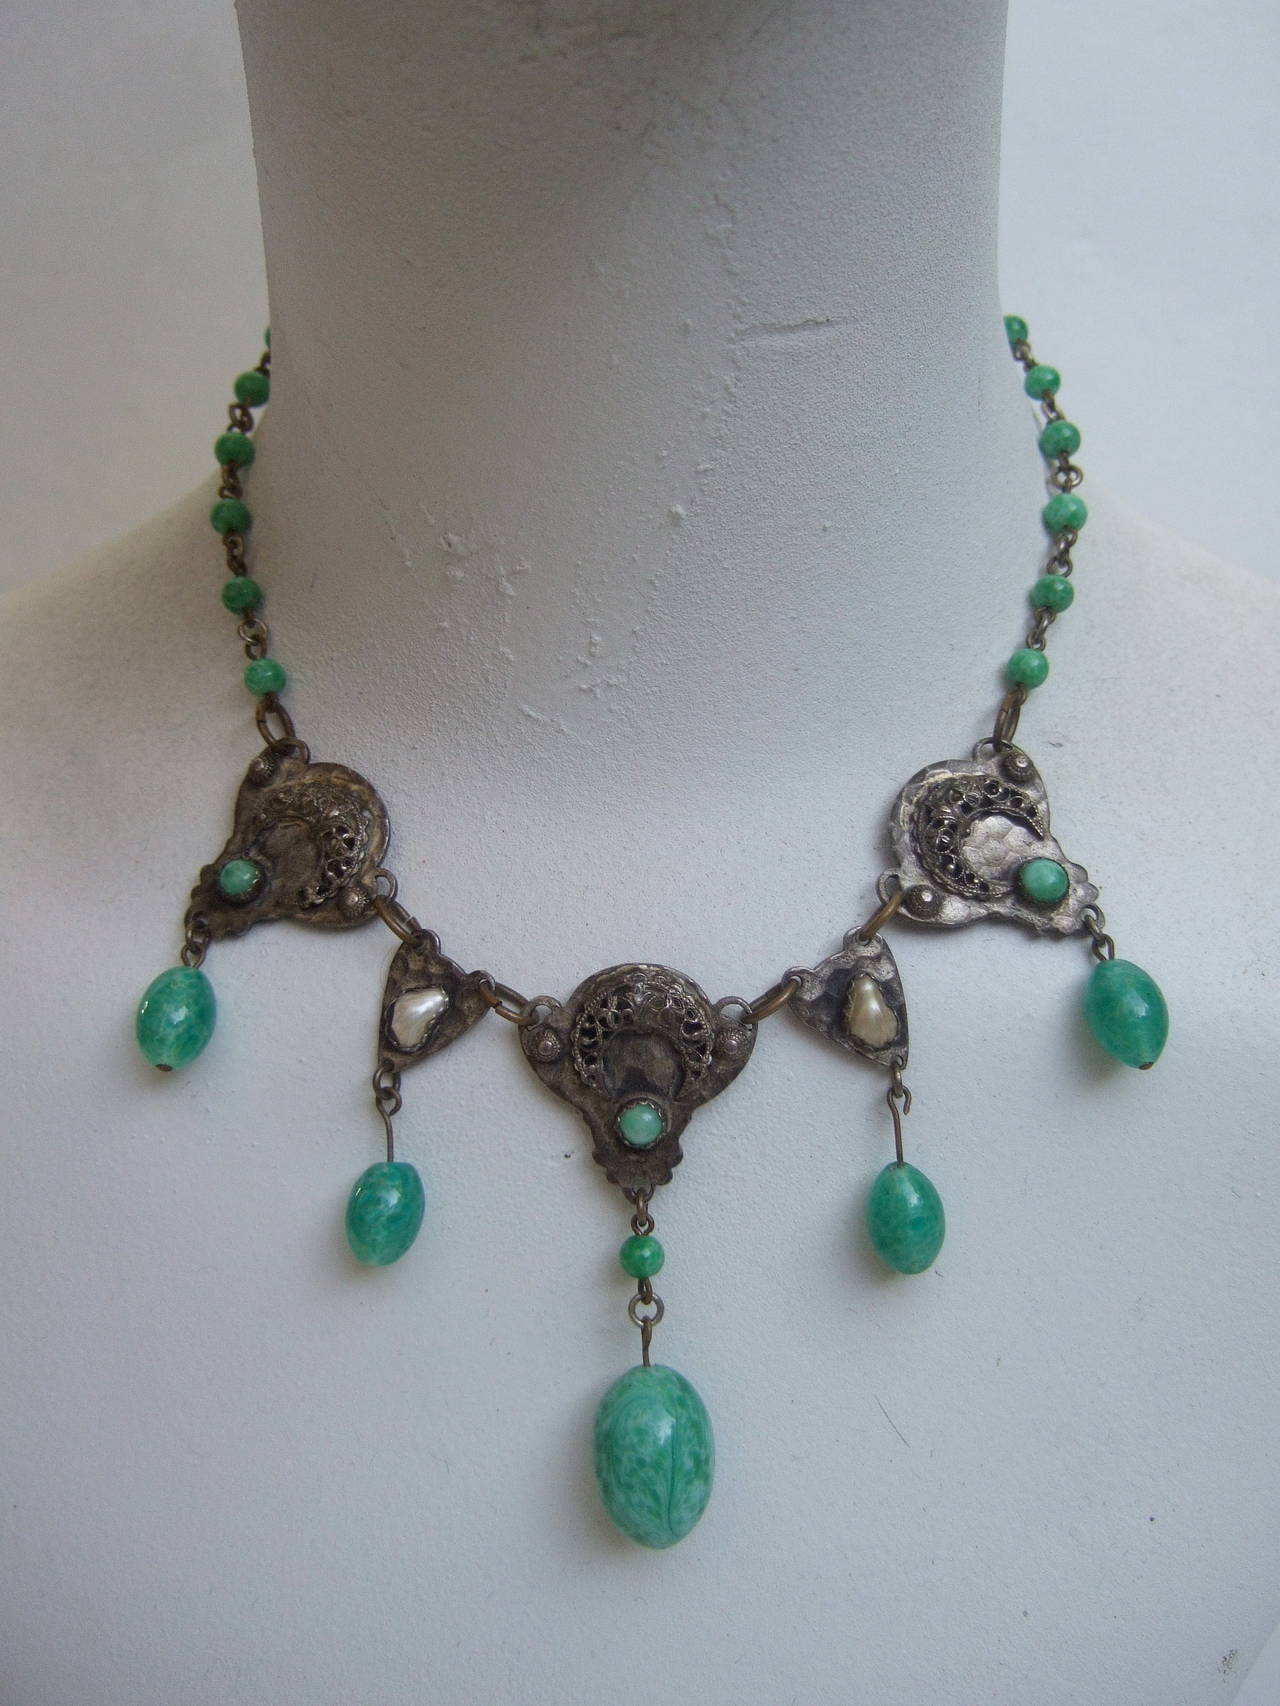 1930s Art Nouveau Peking glass tear drop choker necklace 
The exquisite necklace is designed with oval shaped milky
green glass dangling stones

The elegant necklace is designed with two small glass
enamel baroque pearls. The dangling glass